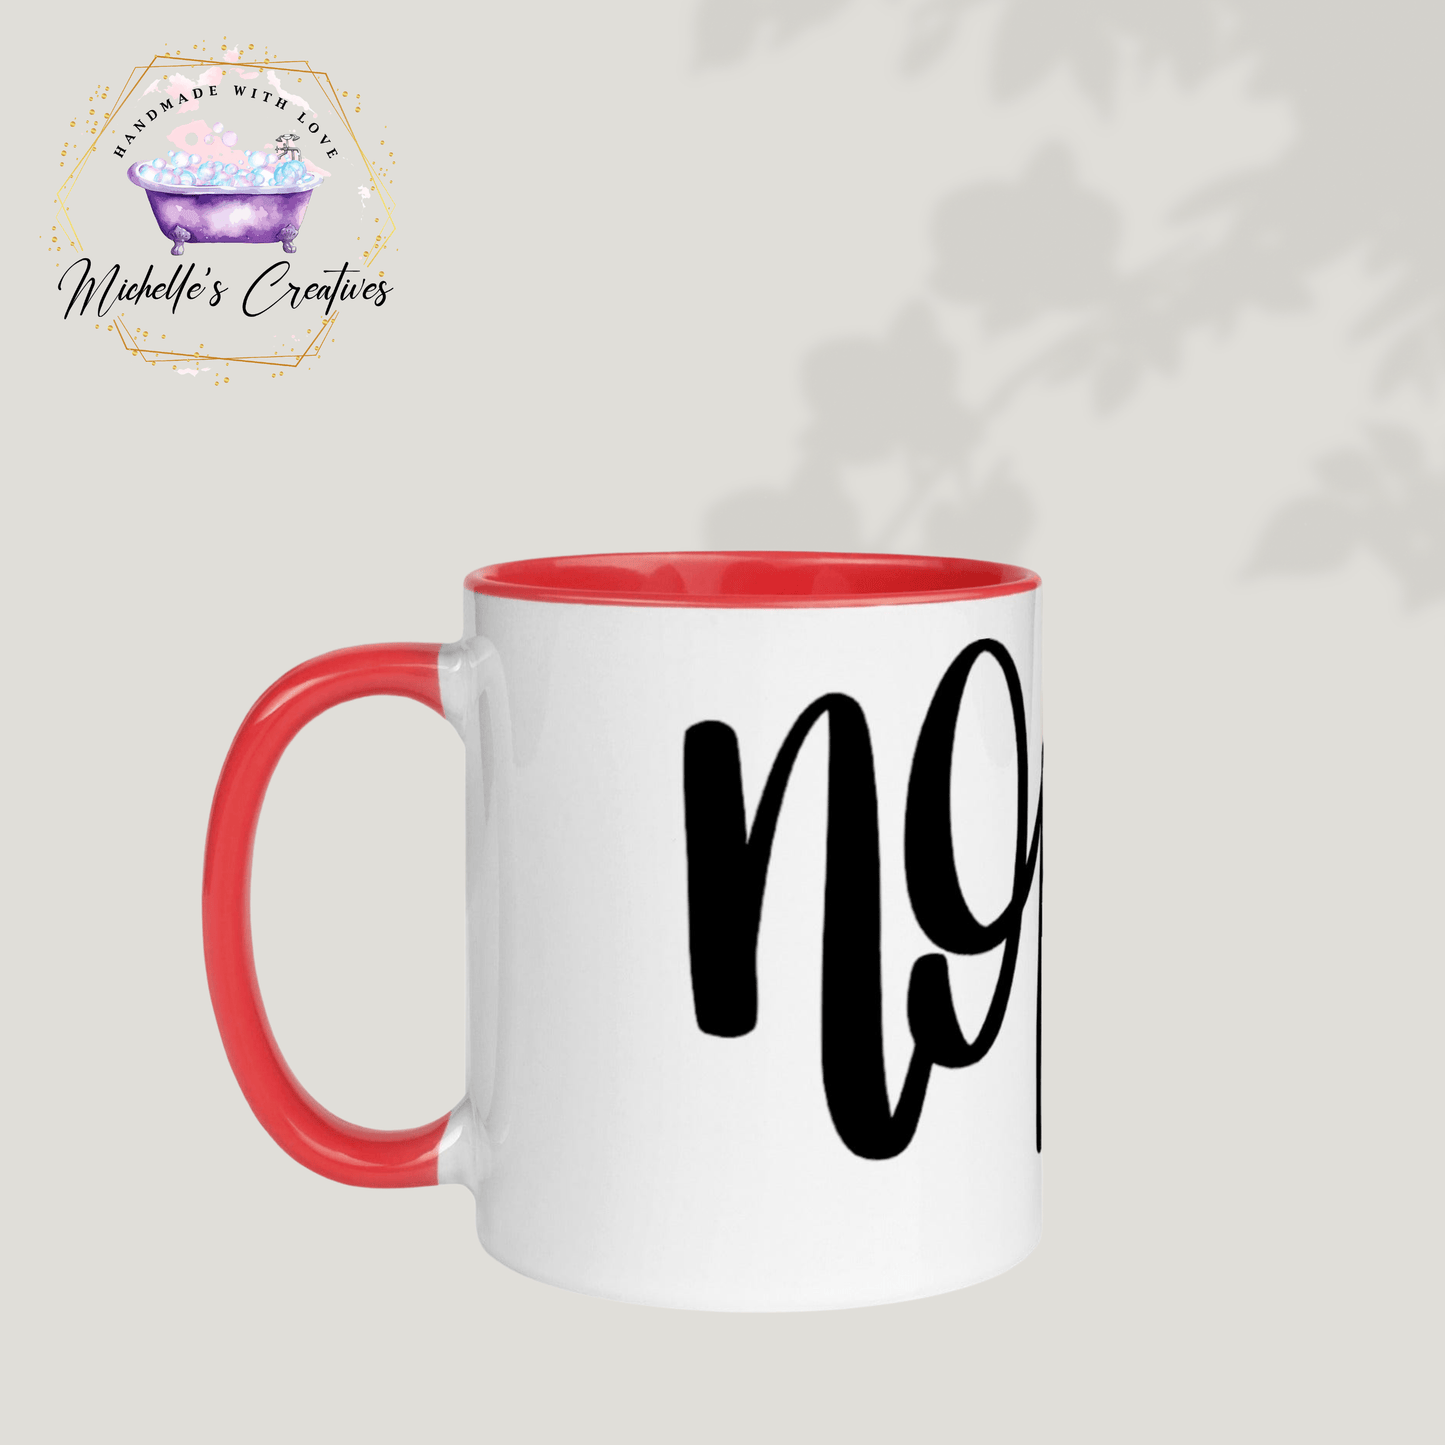 Michelle's Creatives Mugs Nope Not Today Mug with Color Inside 3340166_11049